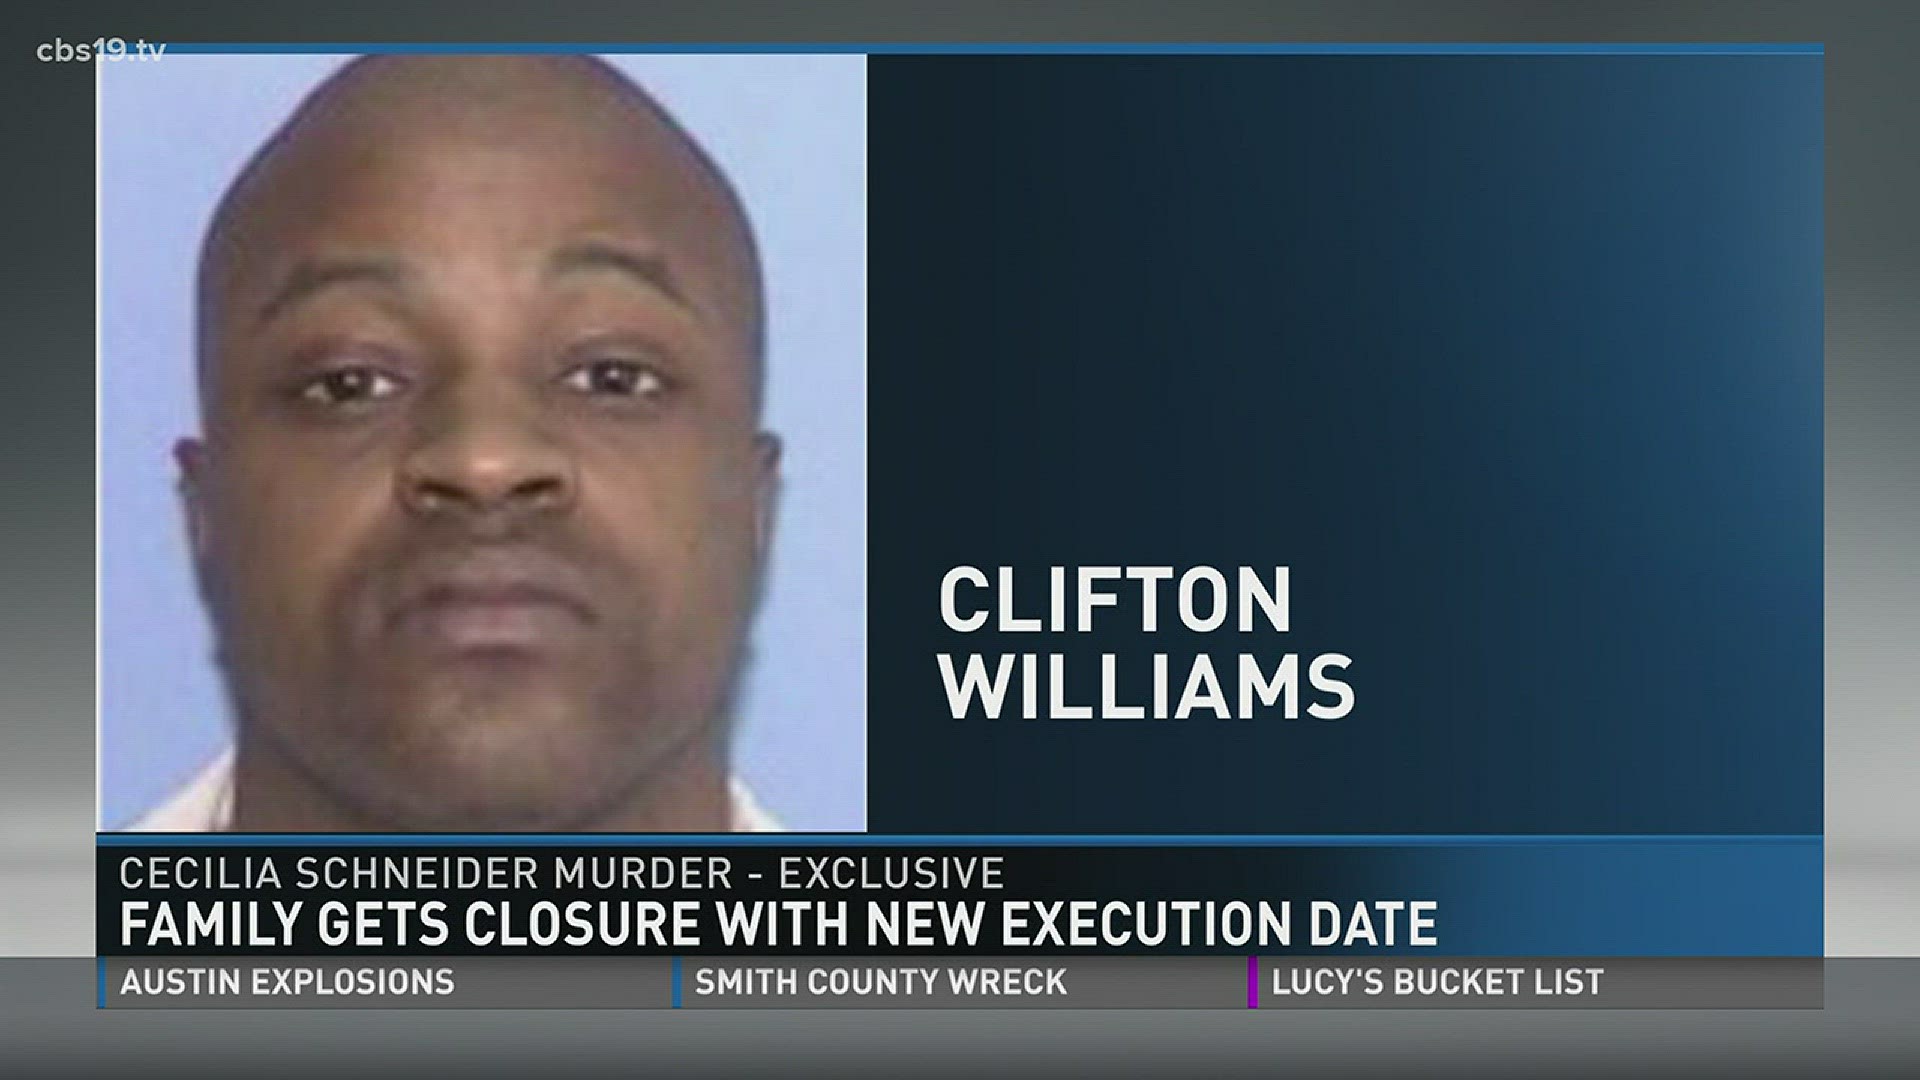 Tyler death row inmate gets execution date